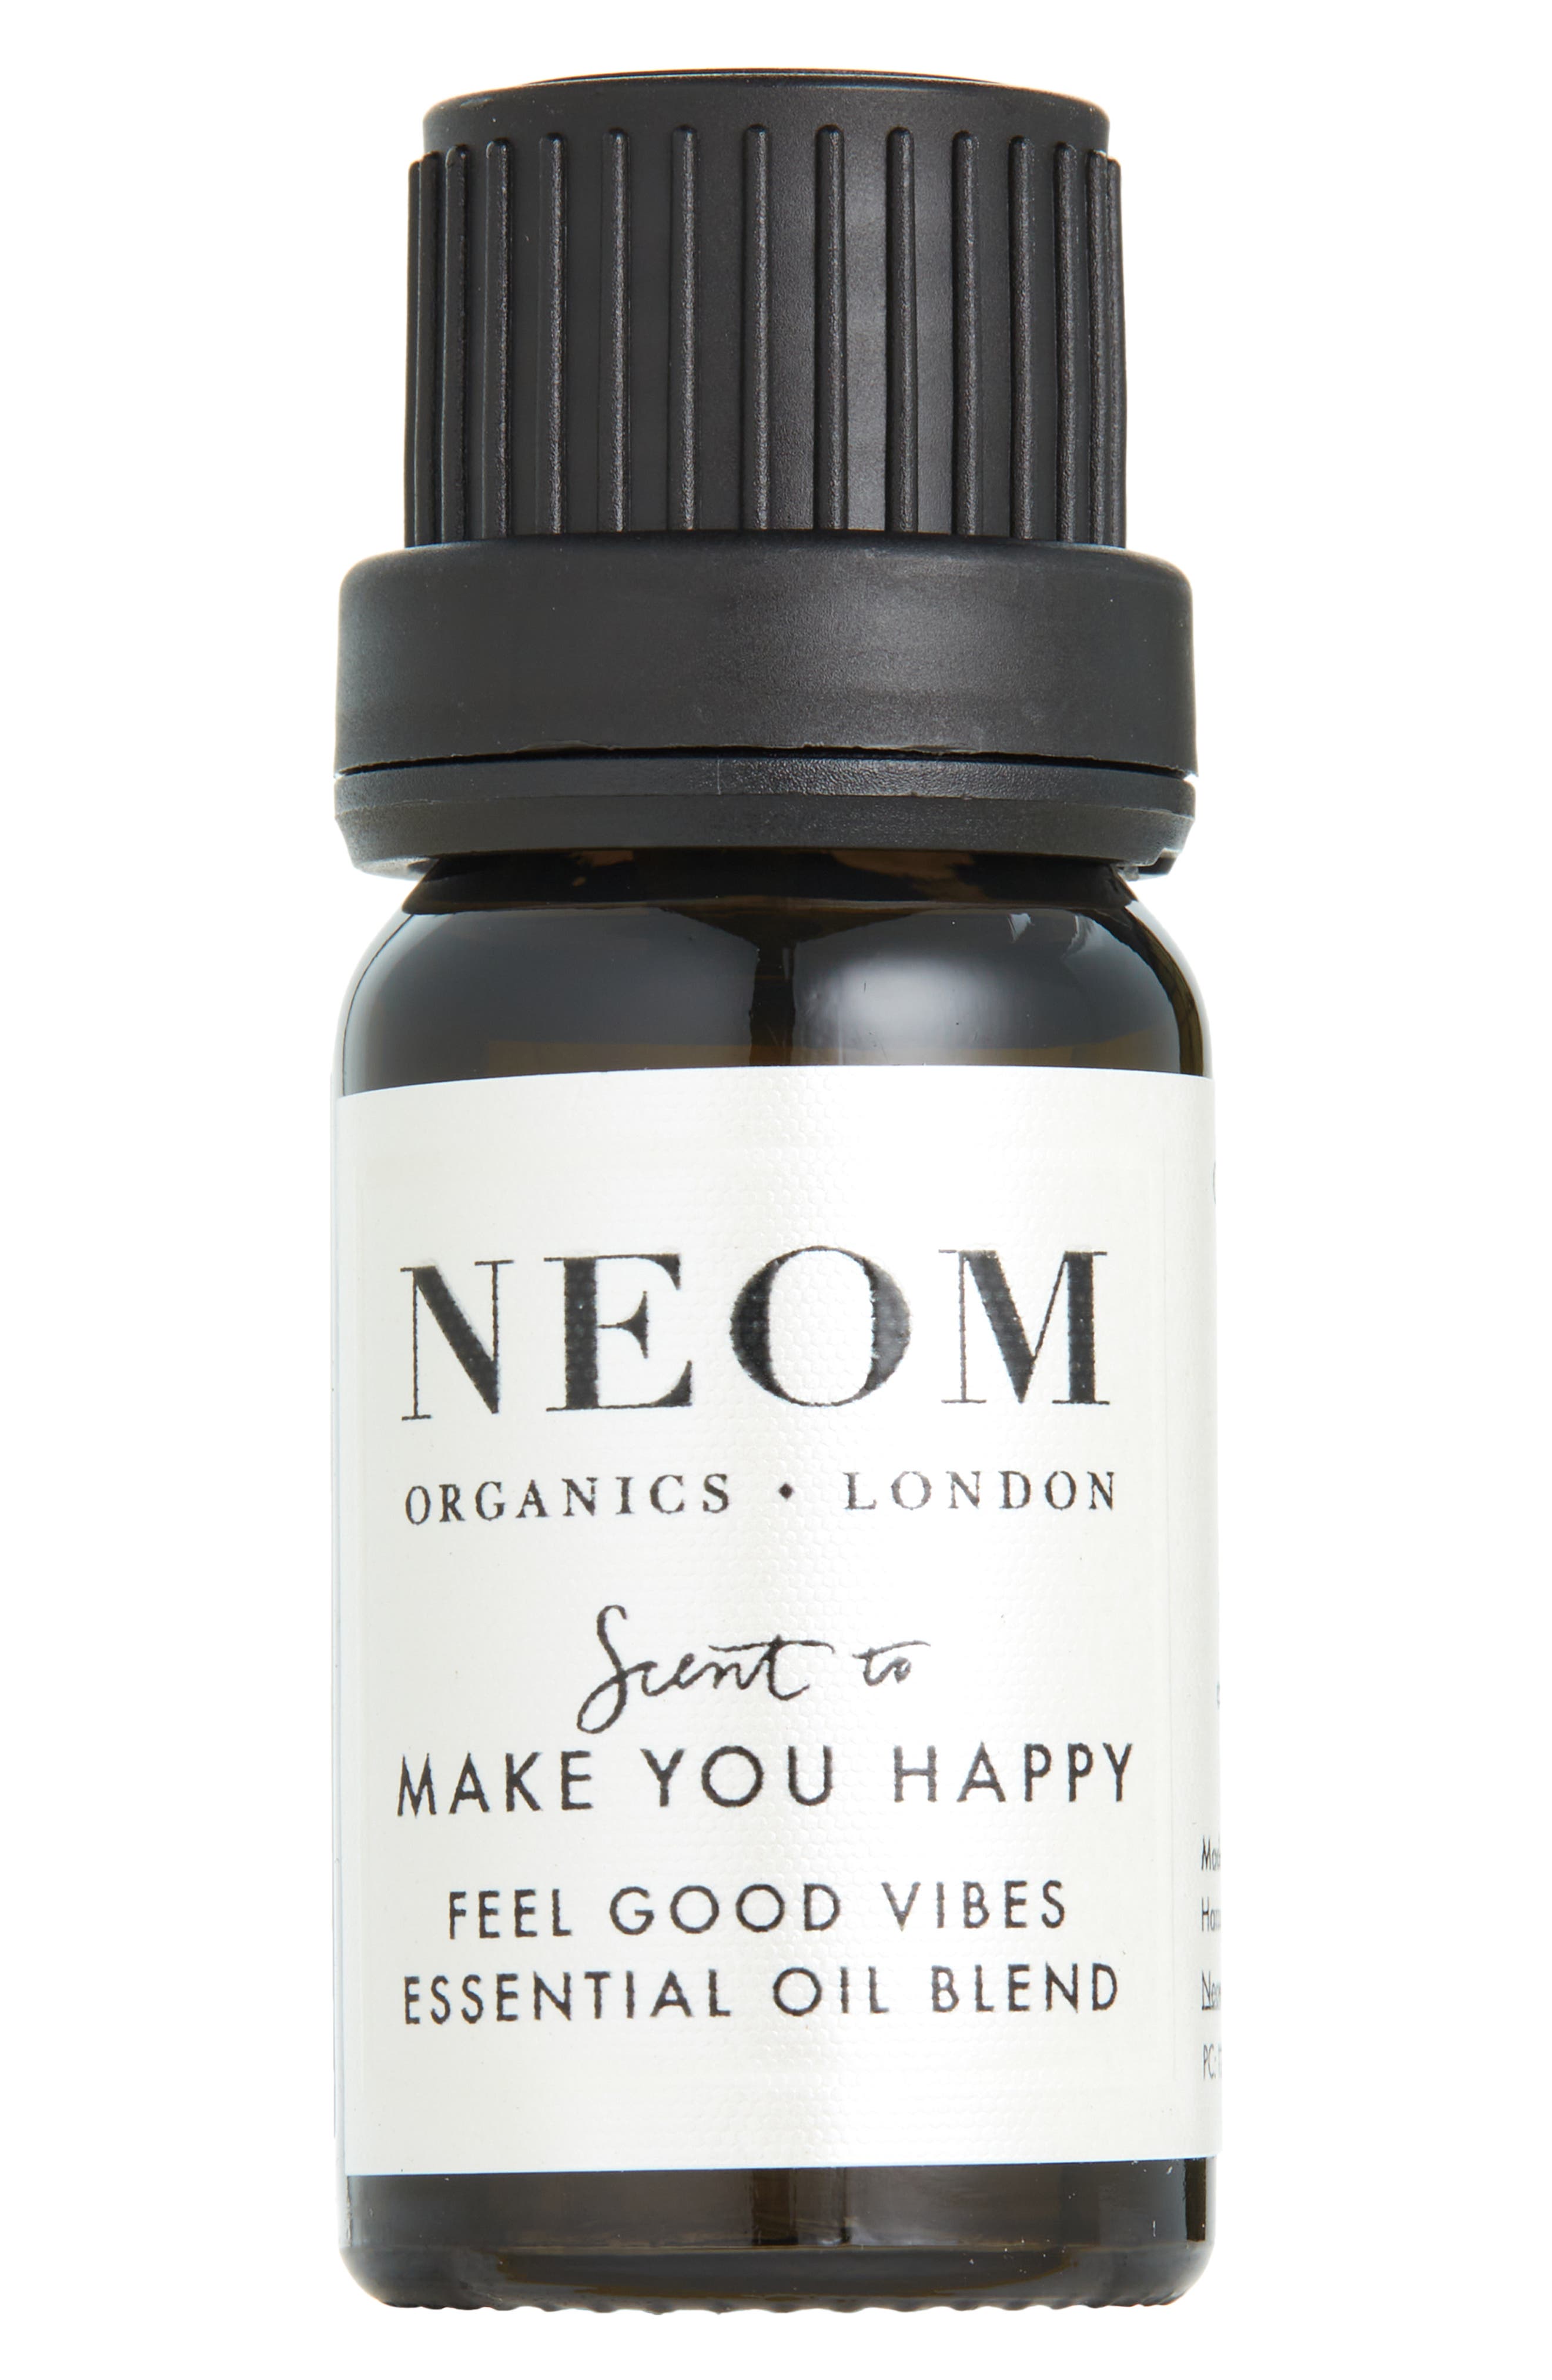 NEOM Scent to Make You Happy Essential Oil Blend 10ml